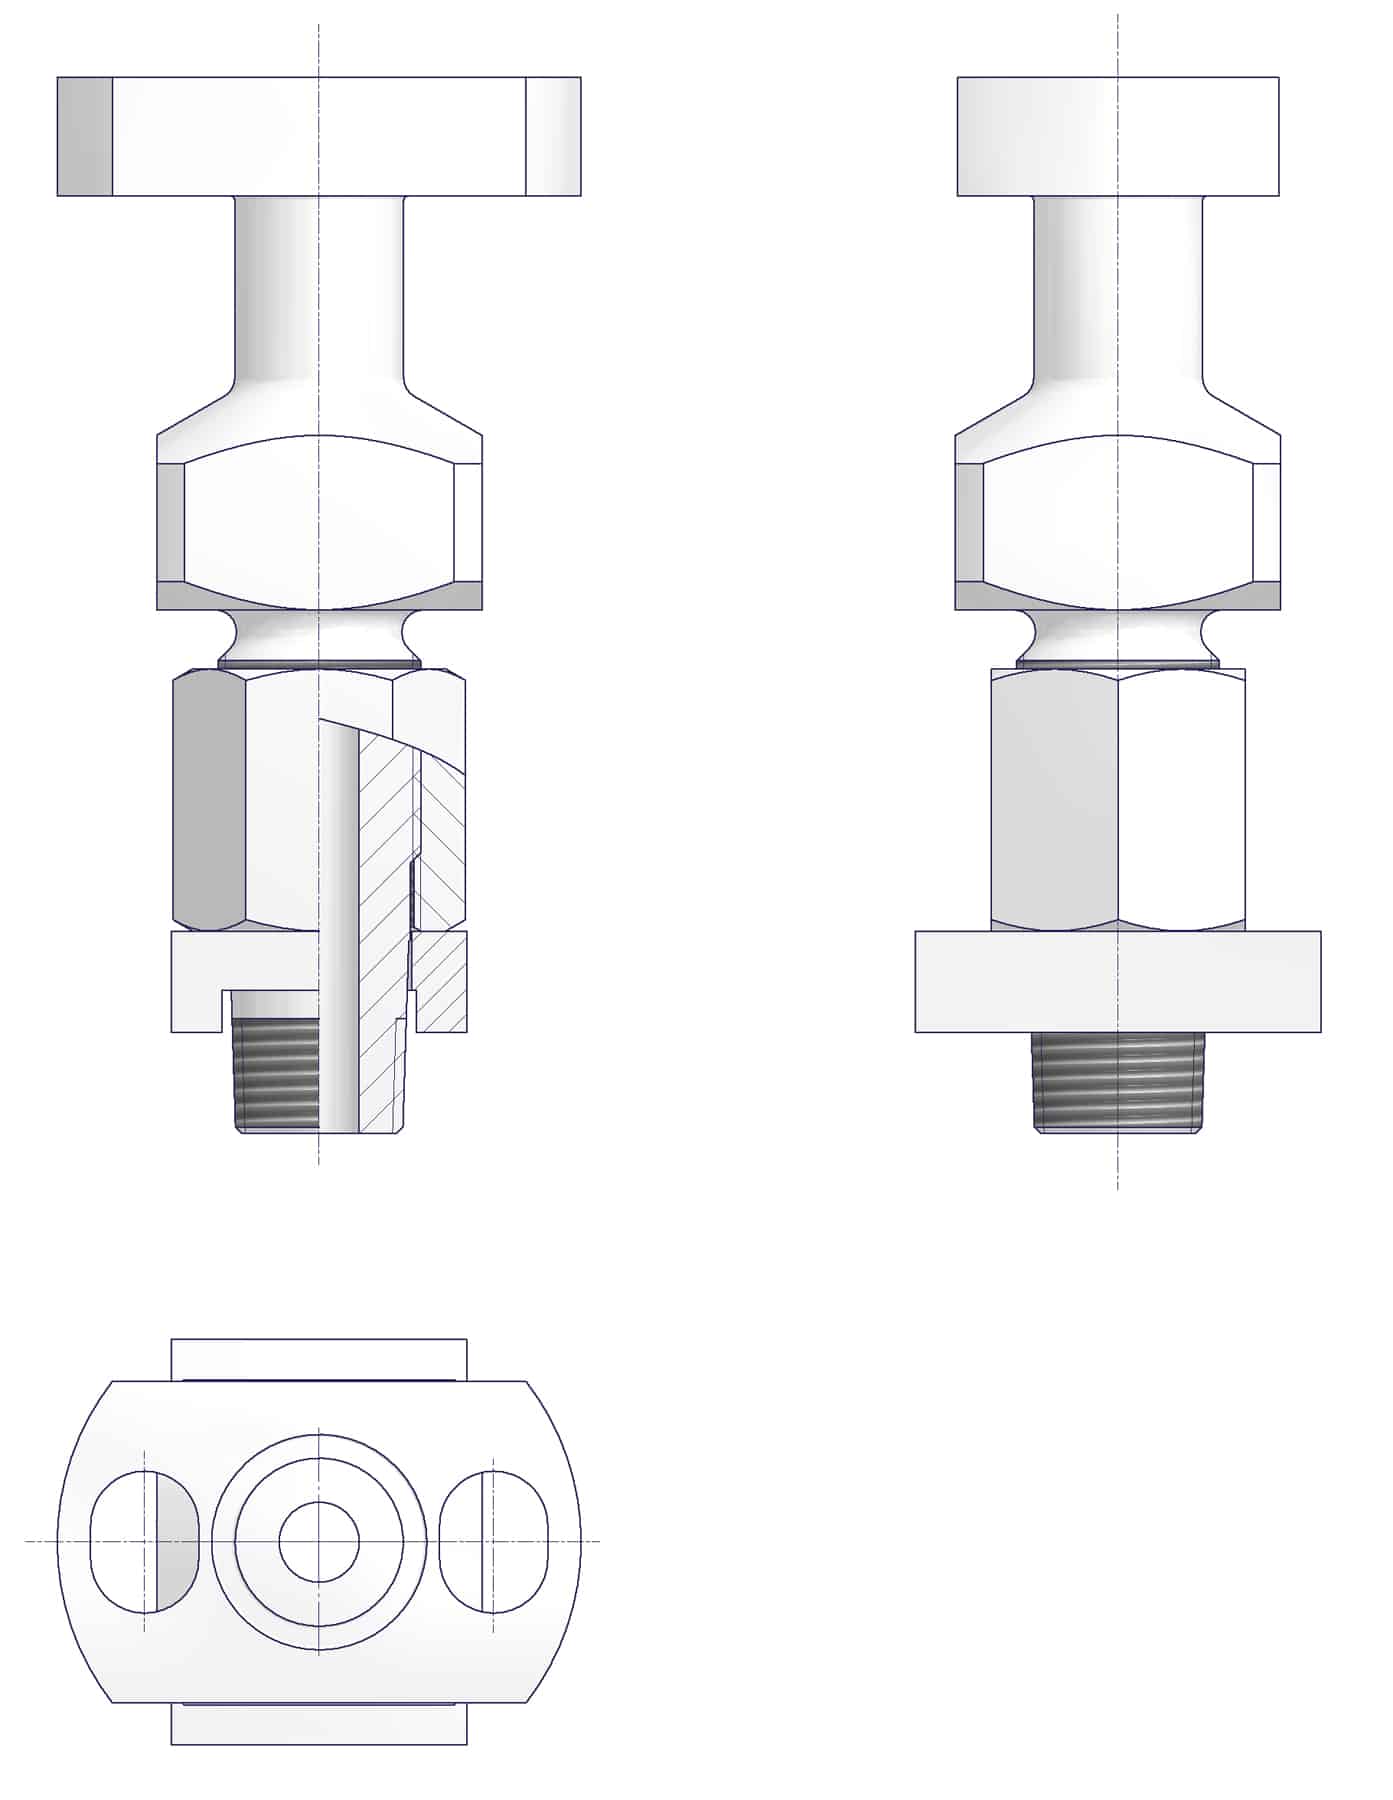 DirectMountSystem - Long type of the stabilized connector.